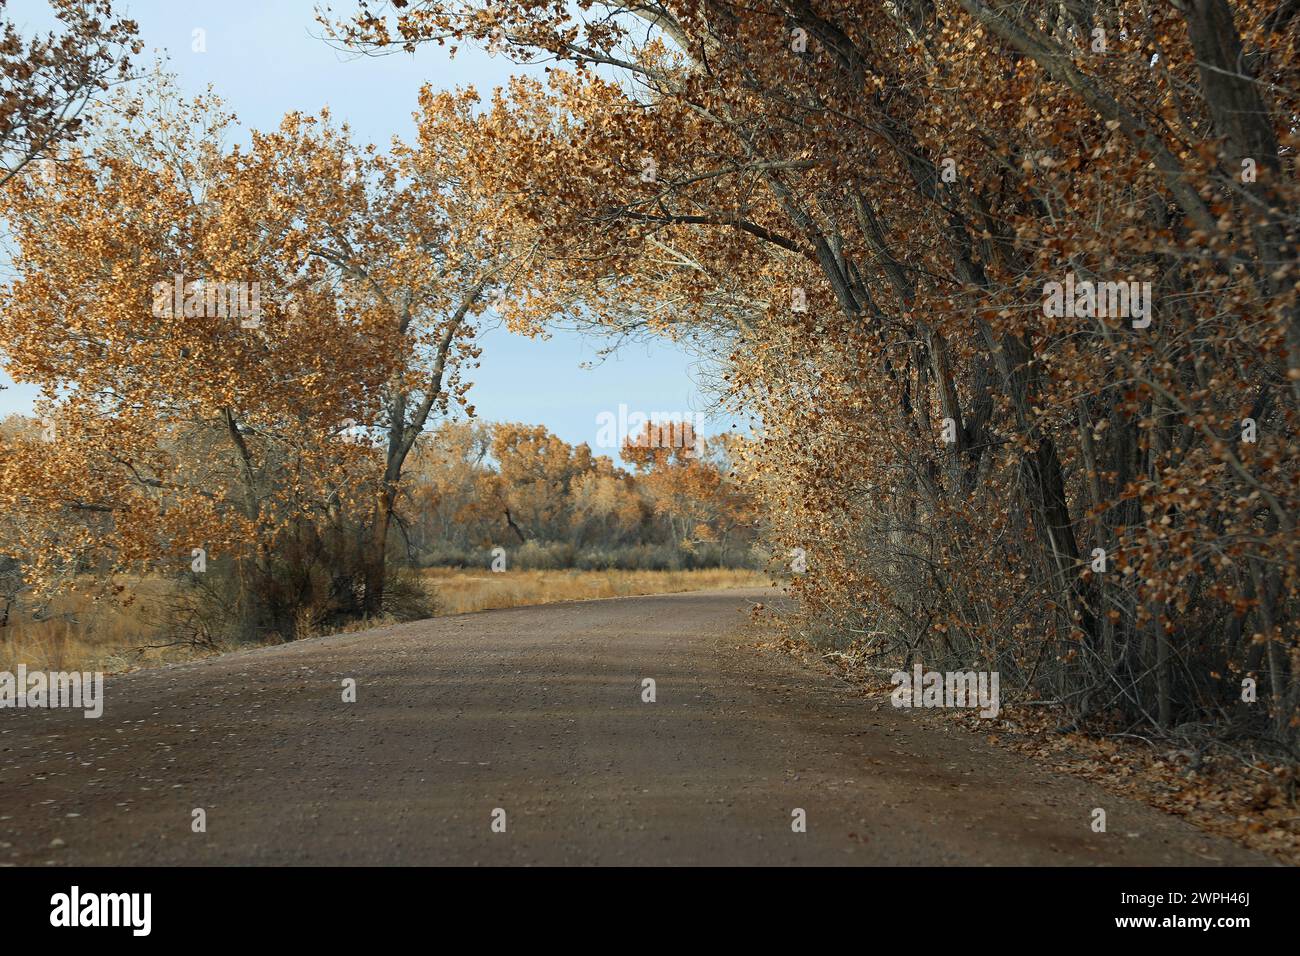 Dirt road - New Mexico Stock Photo